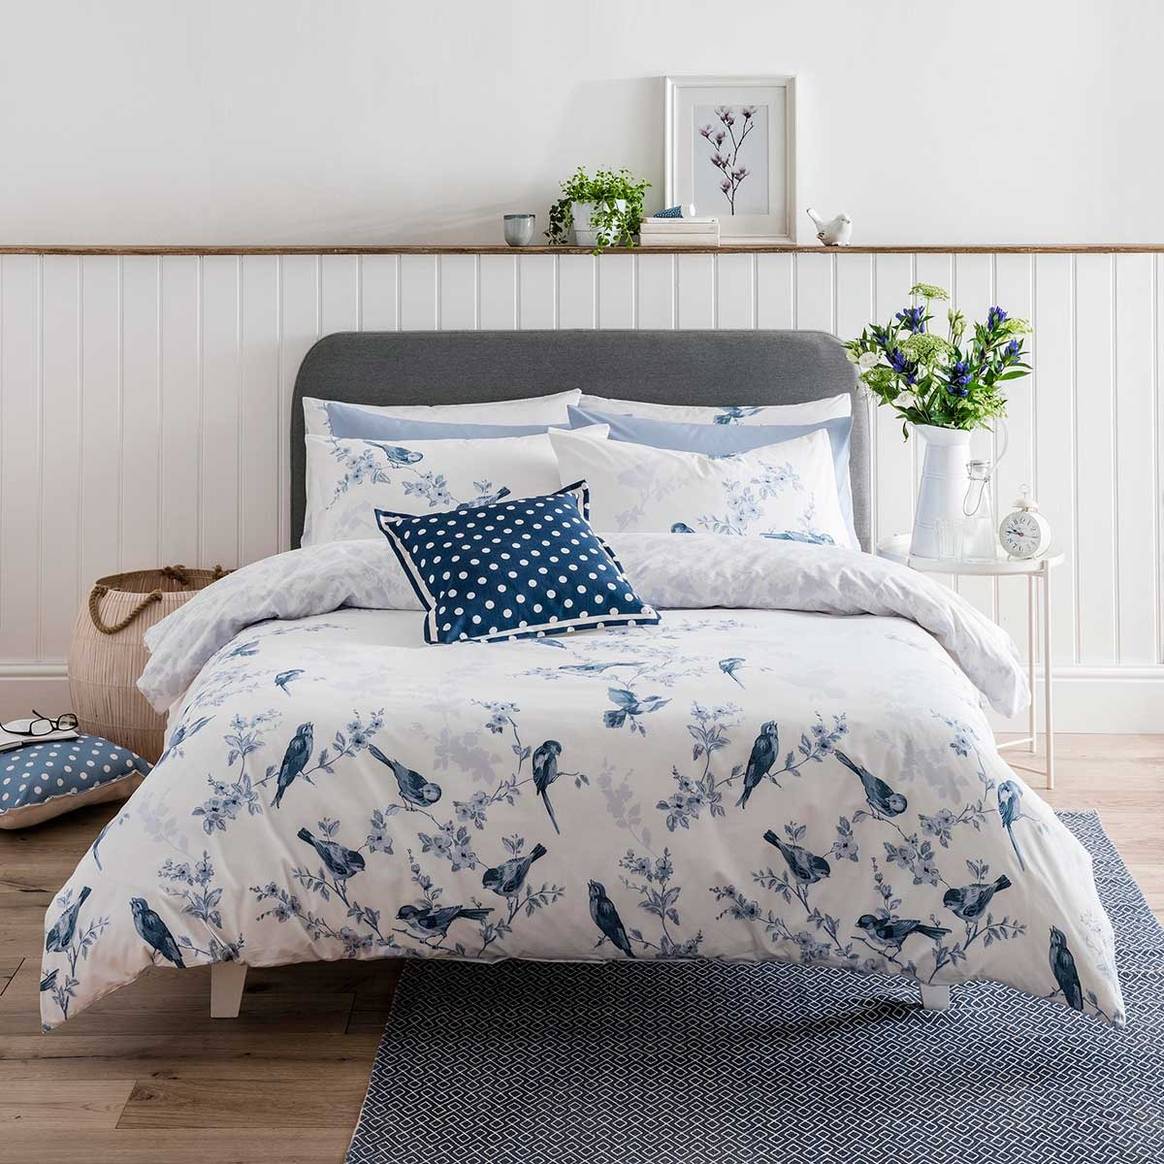 Cath Kidston launches bedding with Ashley Wilde